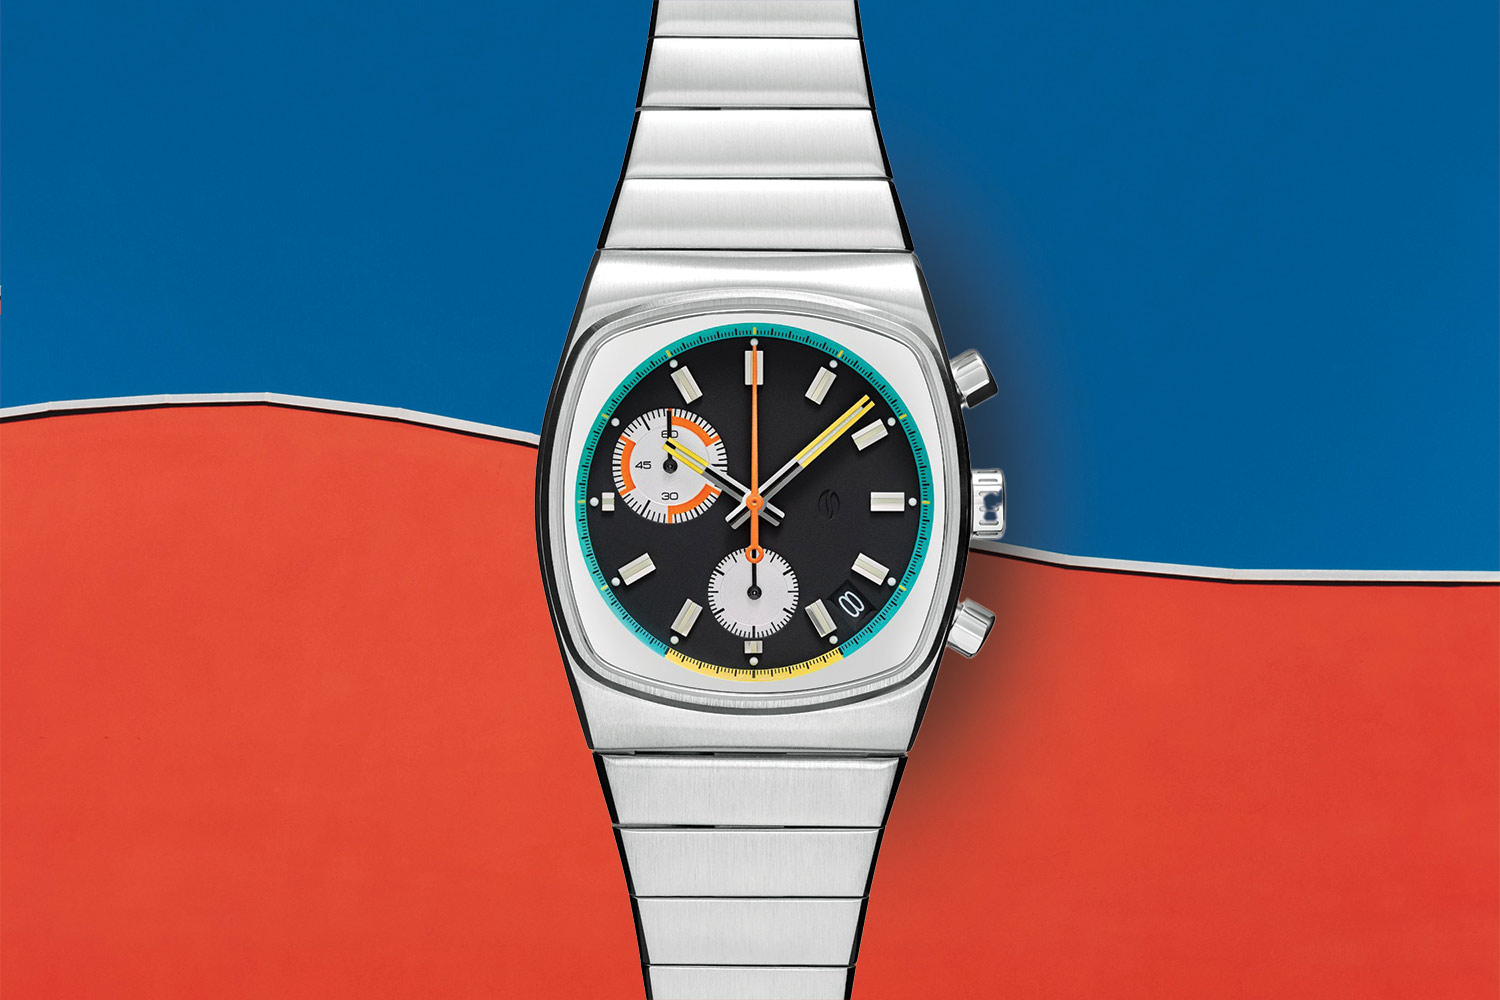 White, blue and black watch